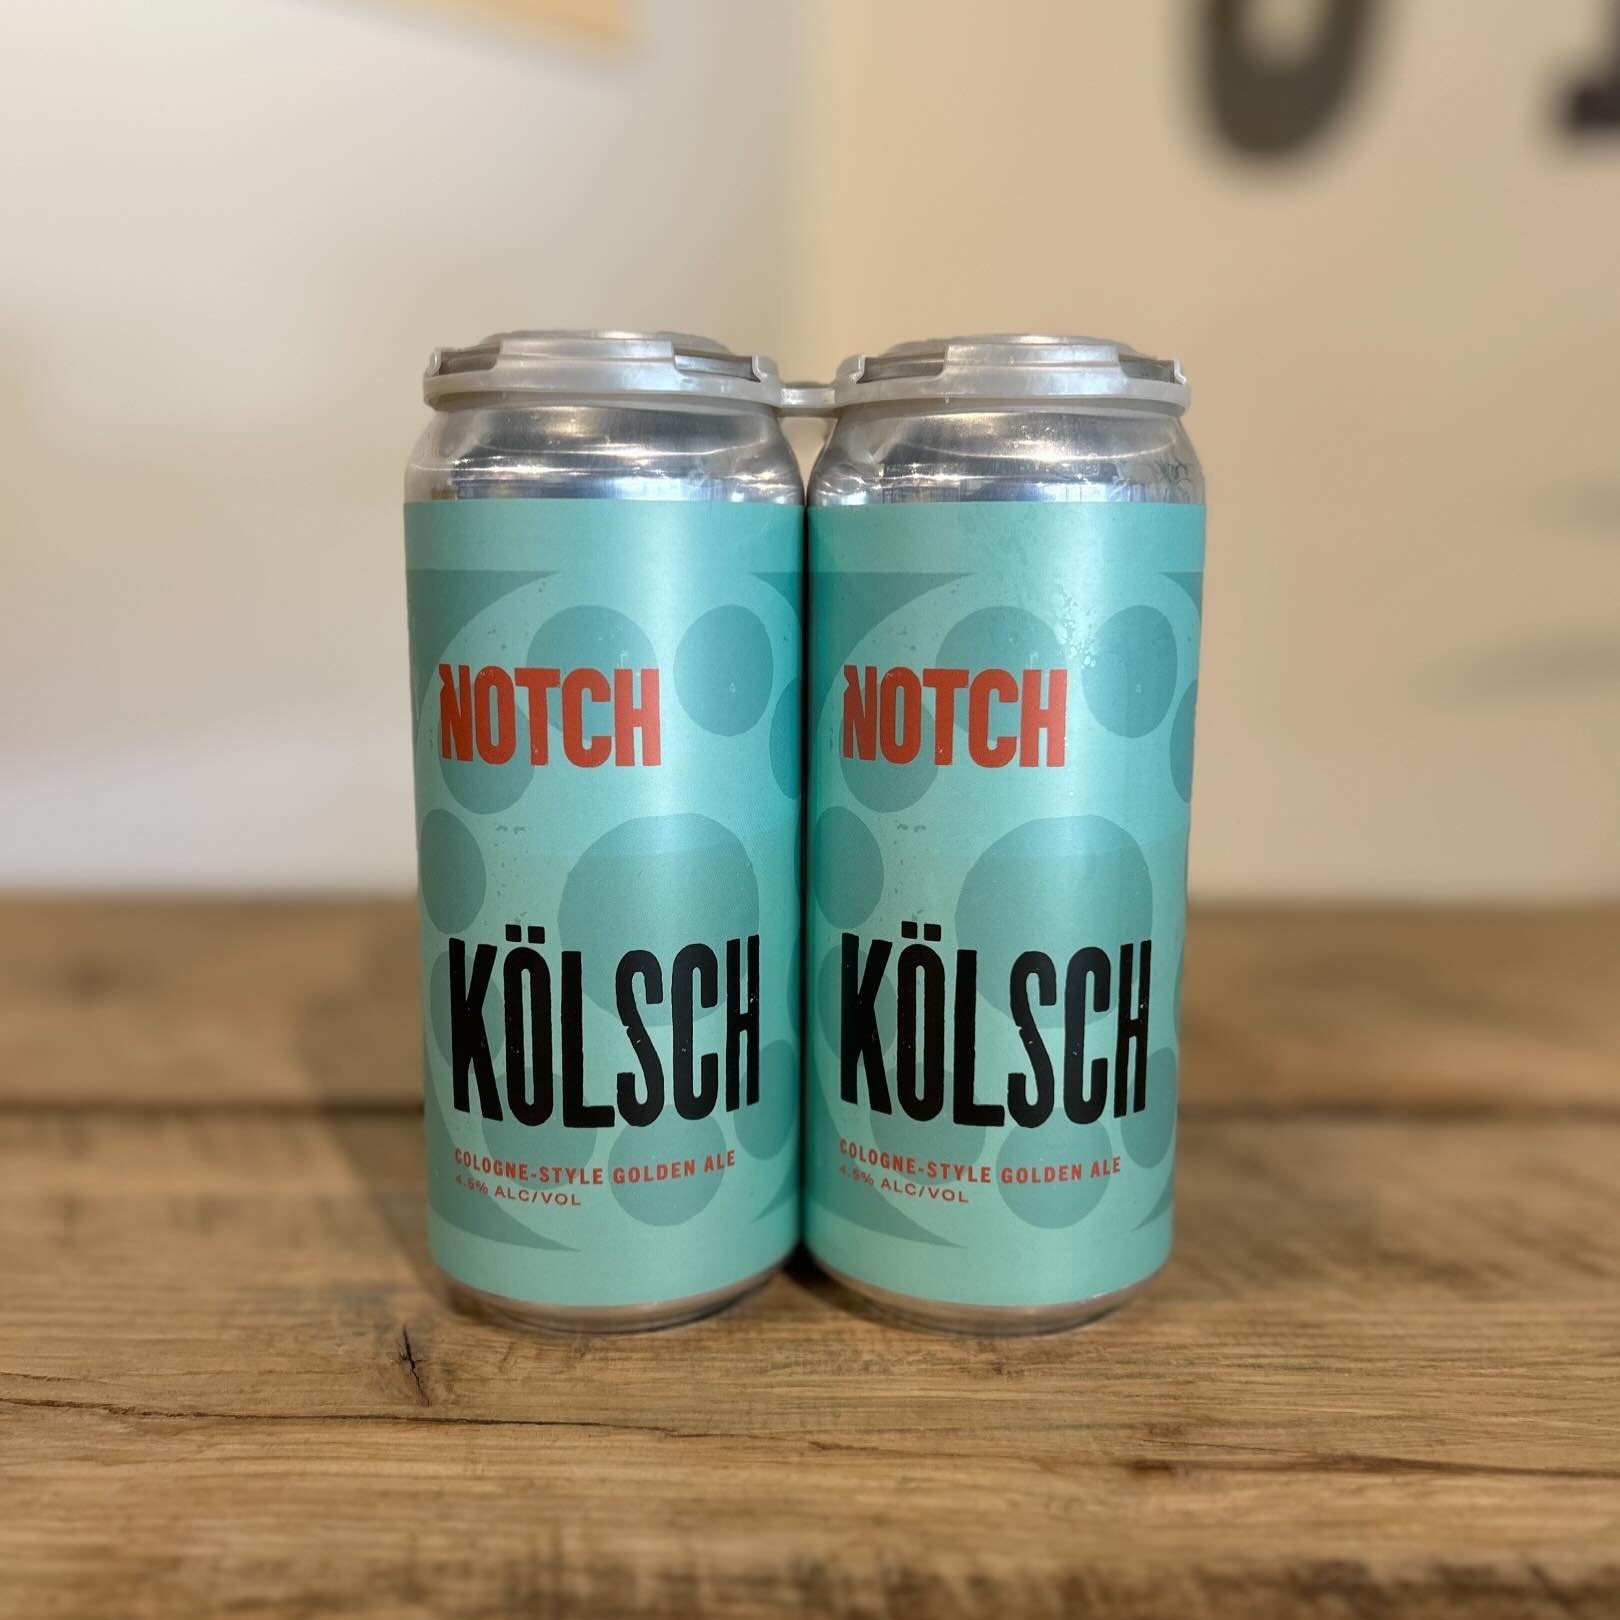 @notchbrewing is back in the shop this week #NowAvailable #SudburyCraftBeer #DrinkLocal
&mdash;
K&ouml;lsch
Cologne Style Golden Ale

Medium in body with a soft mouthfeel and a straw yellow or pale gold color, K&ouml;lsch has a spicy, herbal Noble ho